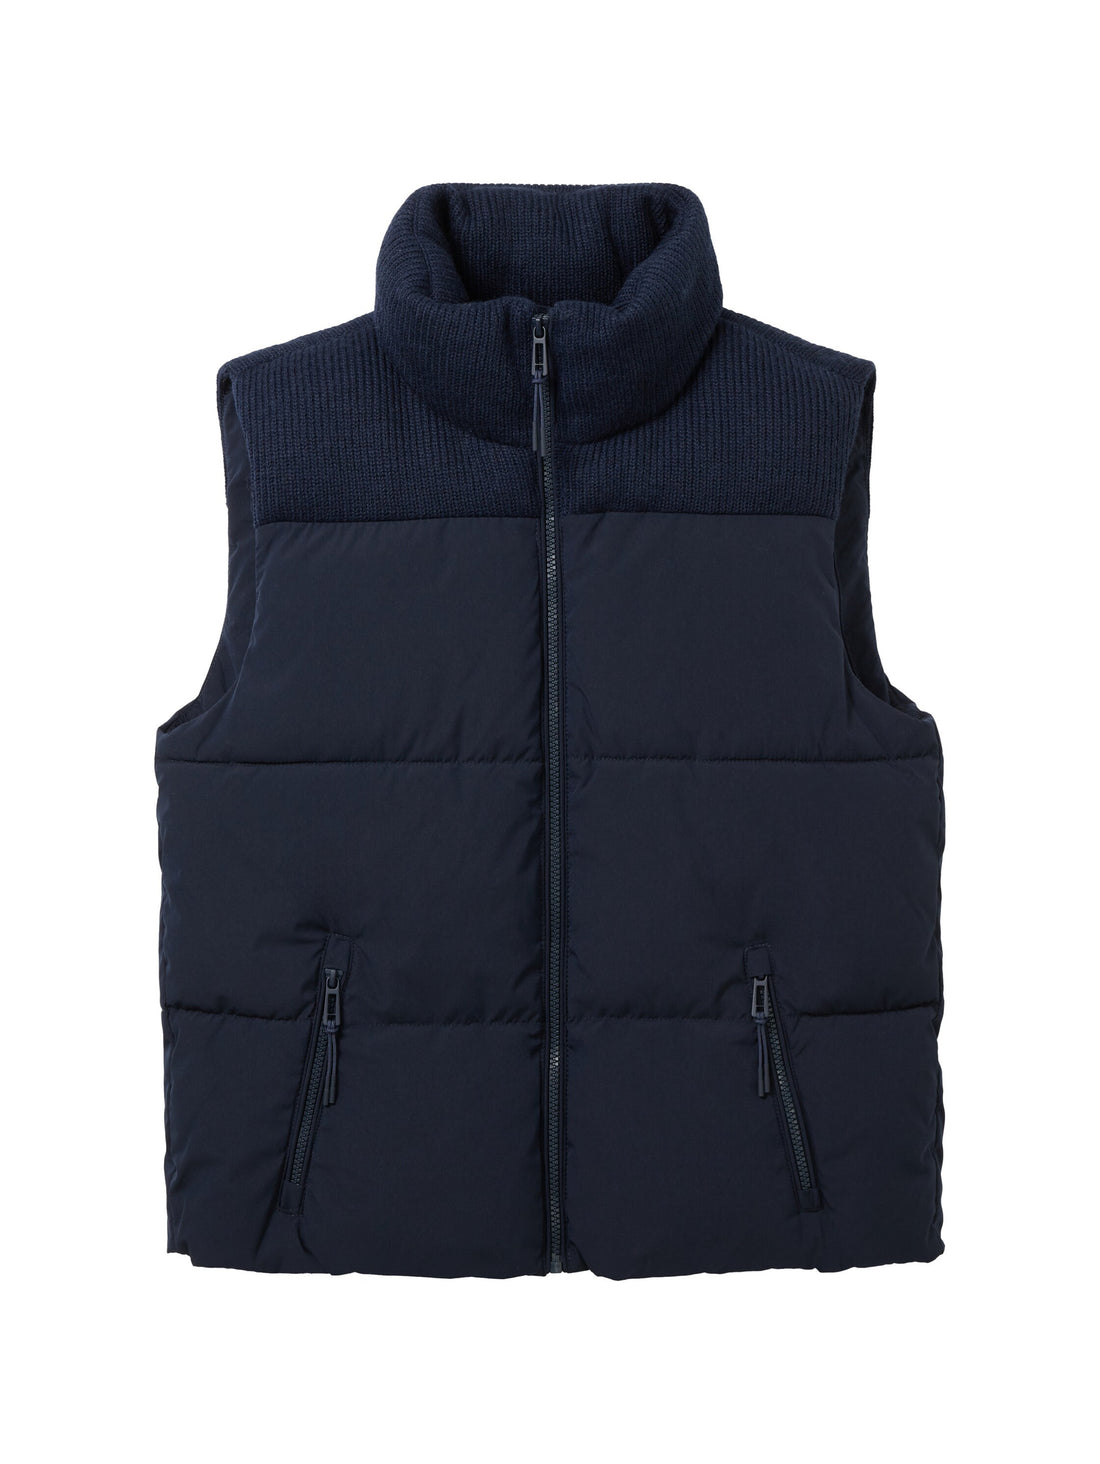 Padded Vest With High Collar_1038676_10668_01